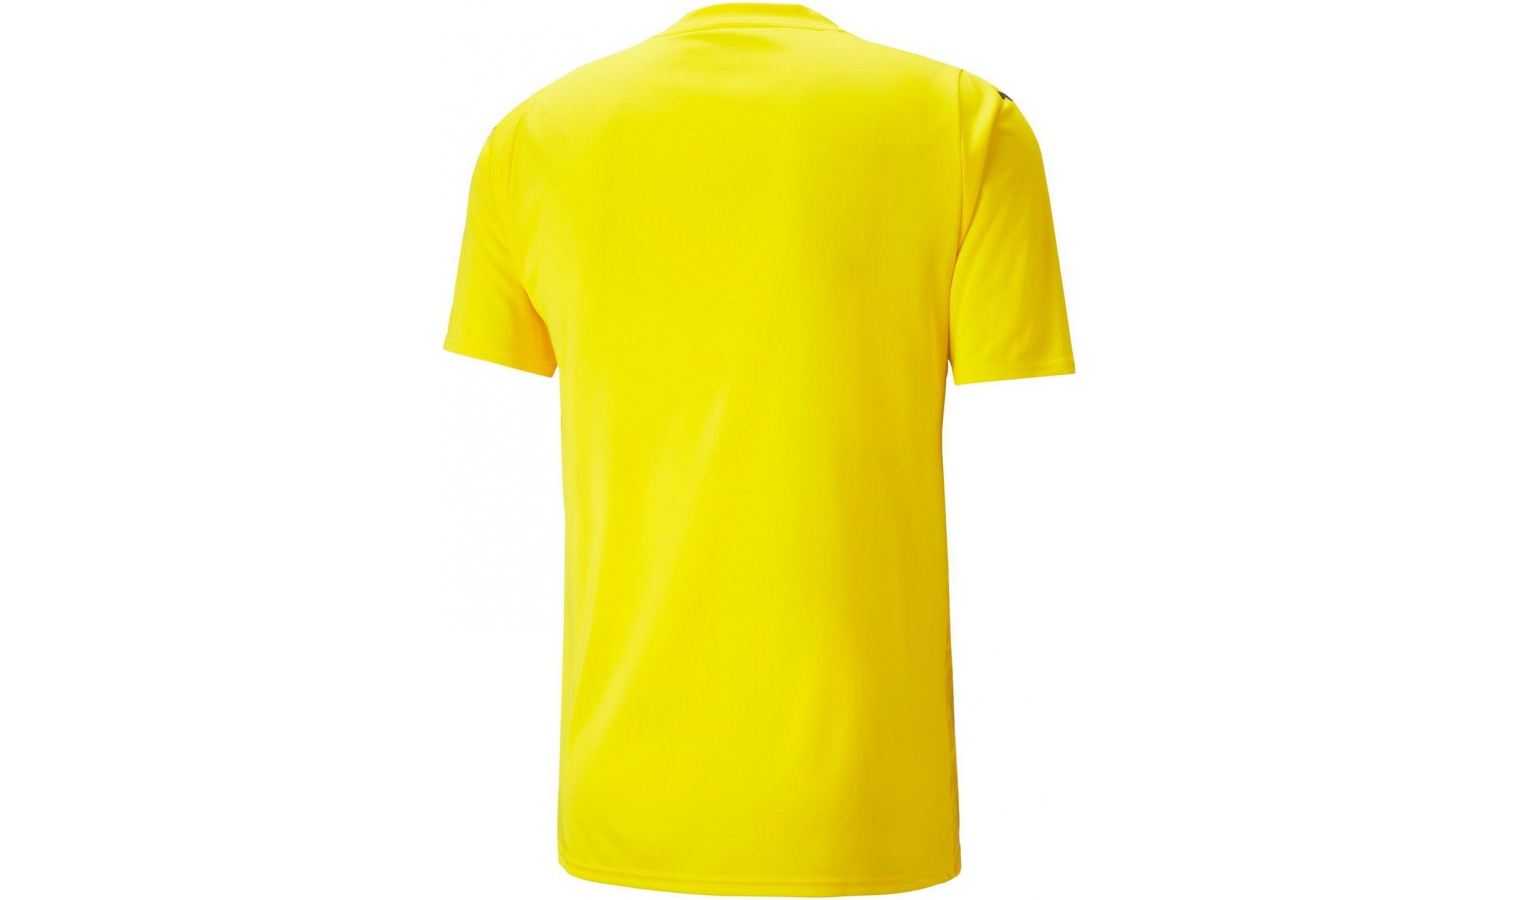 Mens short sleeve jersey Puma TEAMULTIMATE JERSEY yellow | AD Sport.store